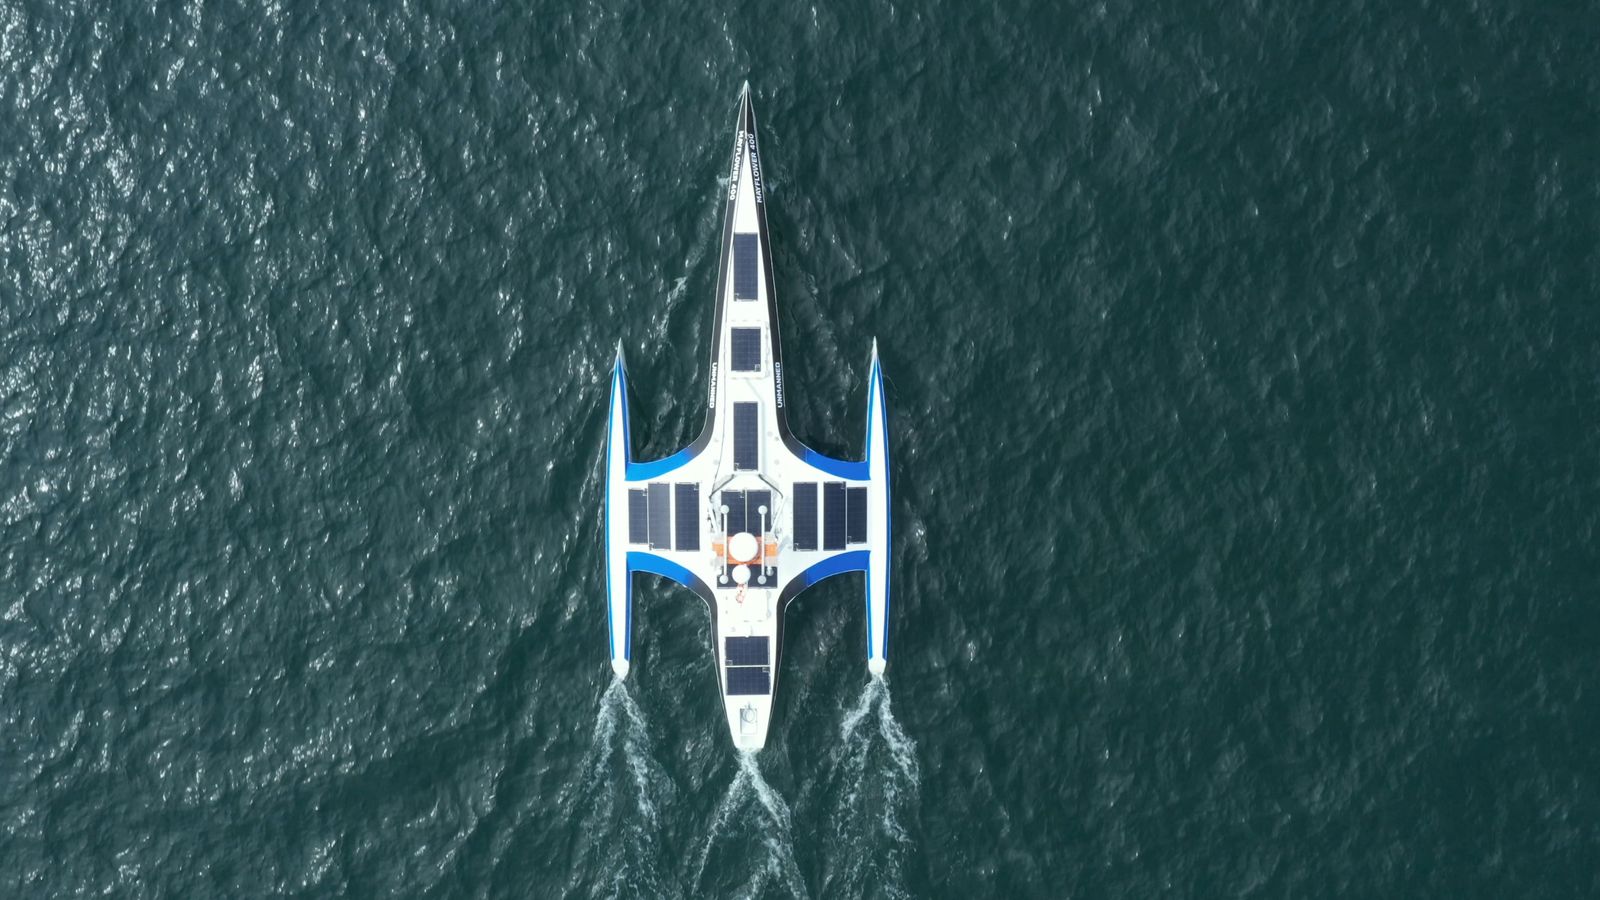 The Star Trek-style ship that may change the way we explore the oceans - with no captain or crew